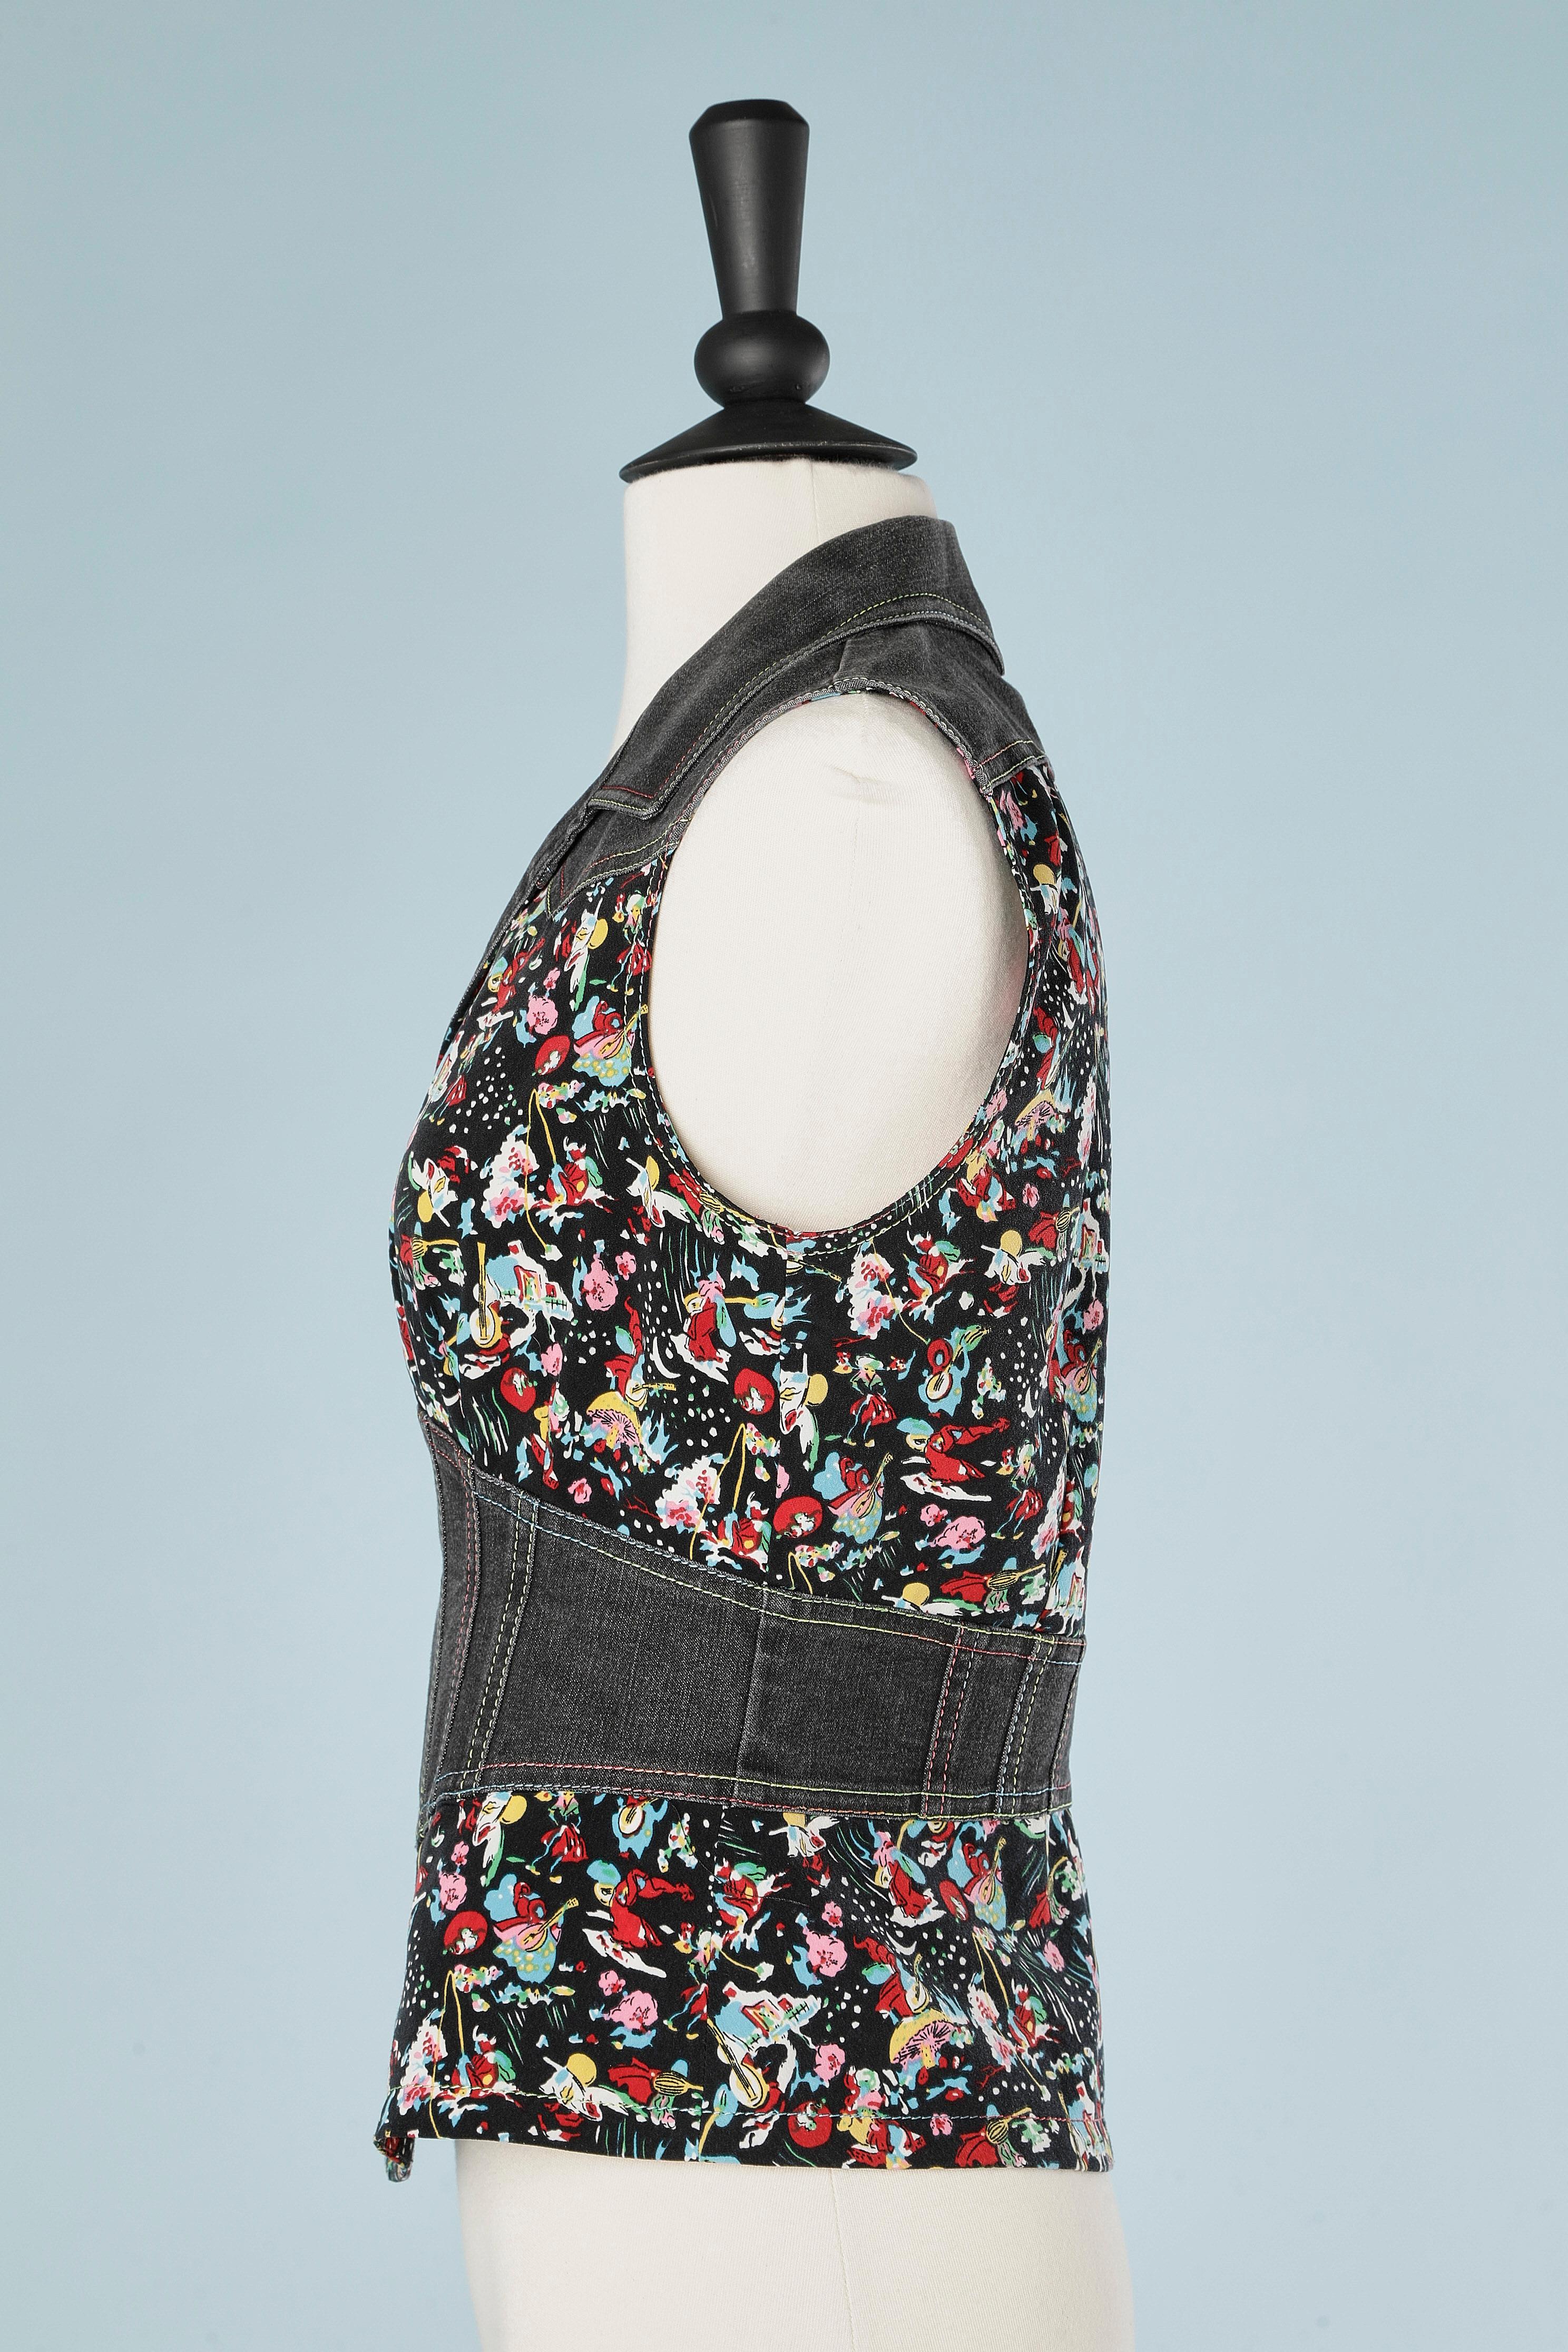 Sleeveless top mix cotton denim and printed fabric with zip KENZO  For Sale 1